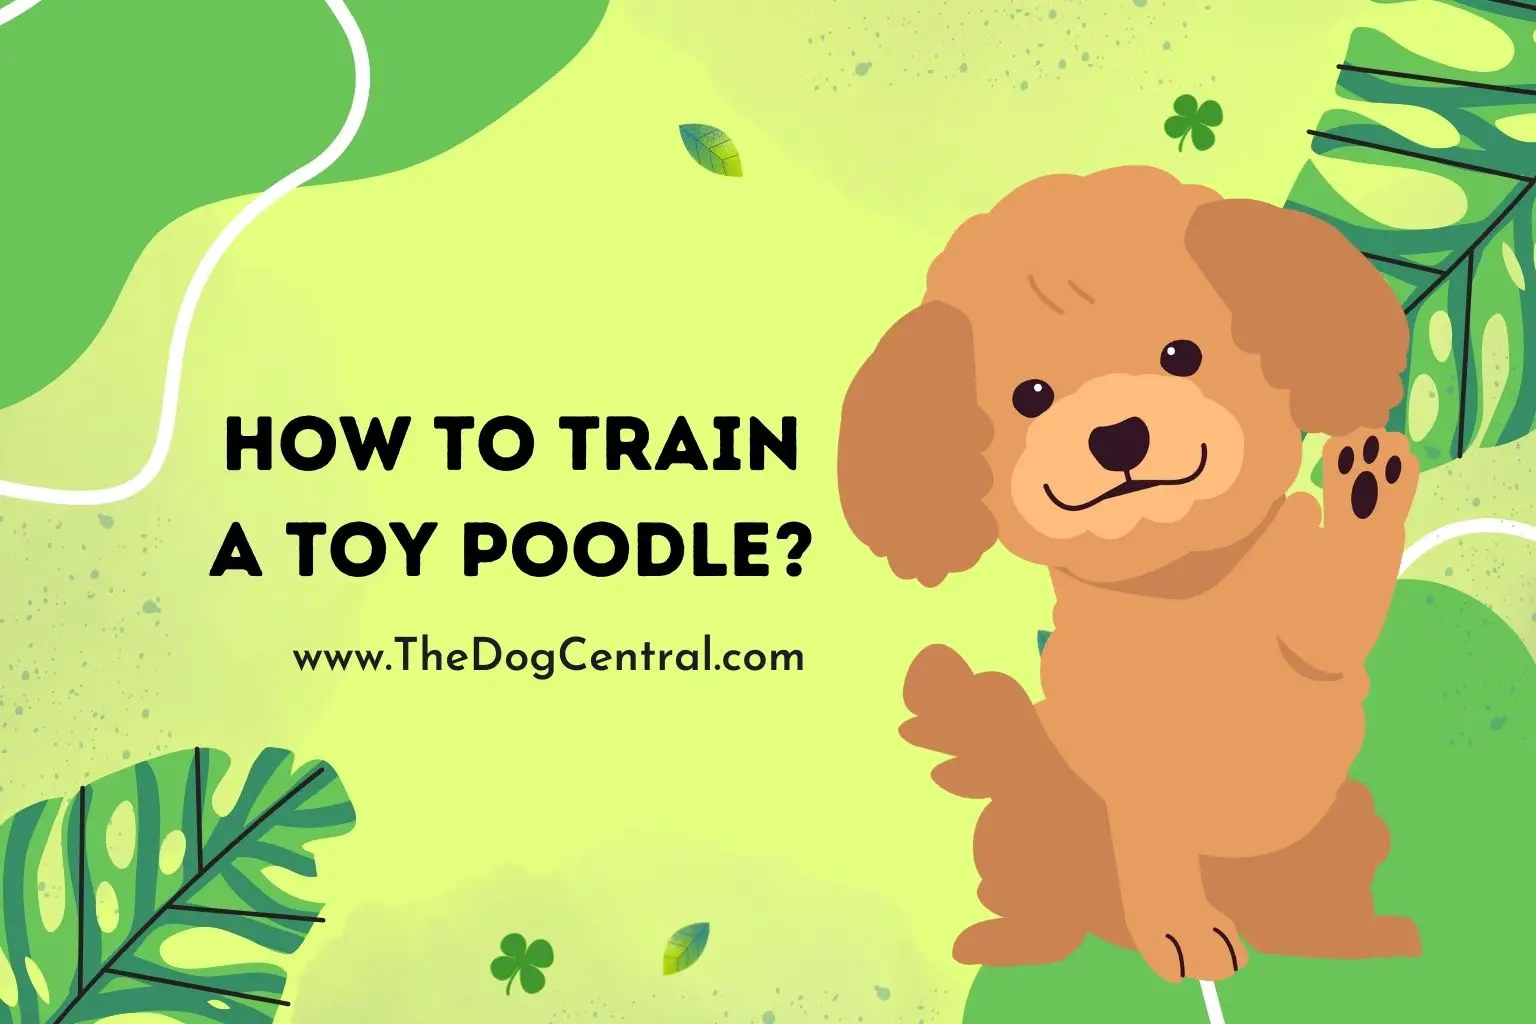 How to train a Toy Poodle